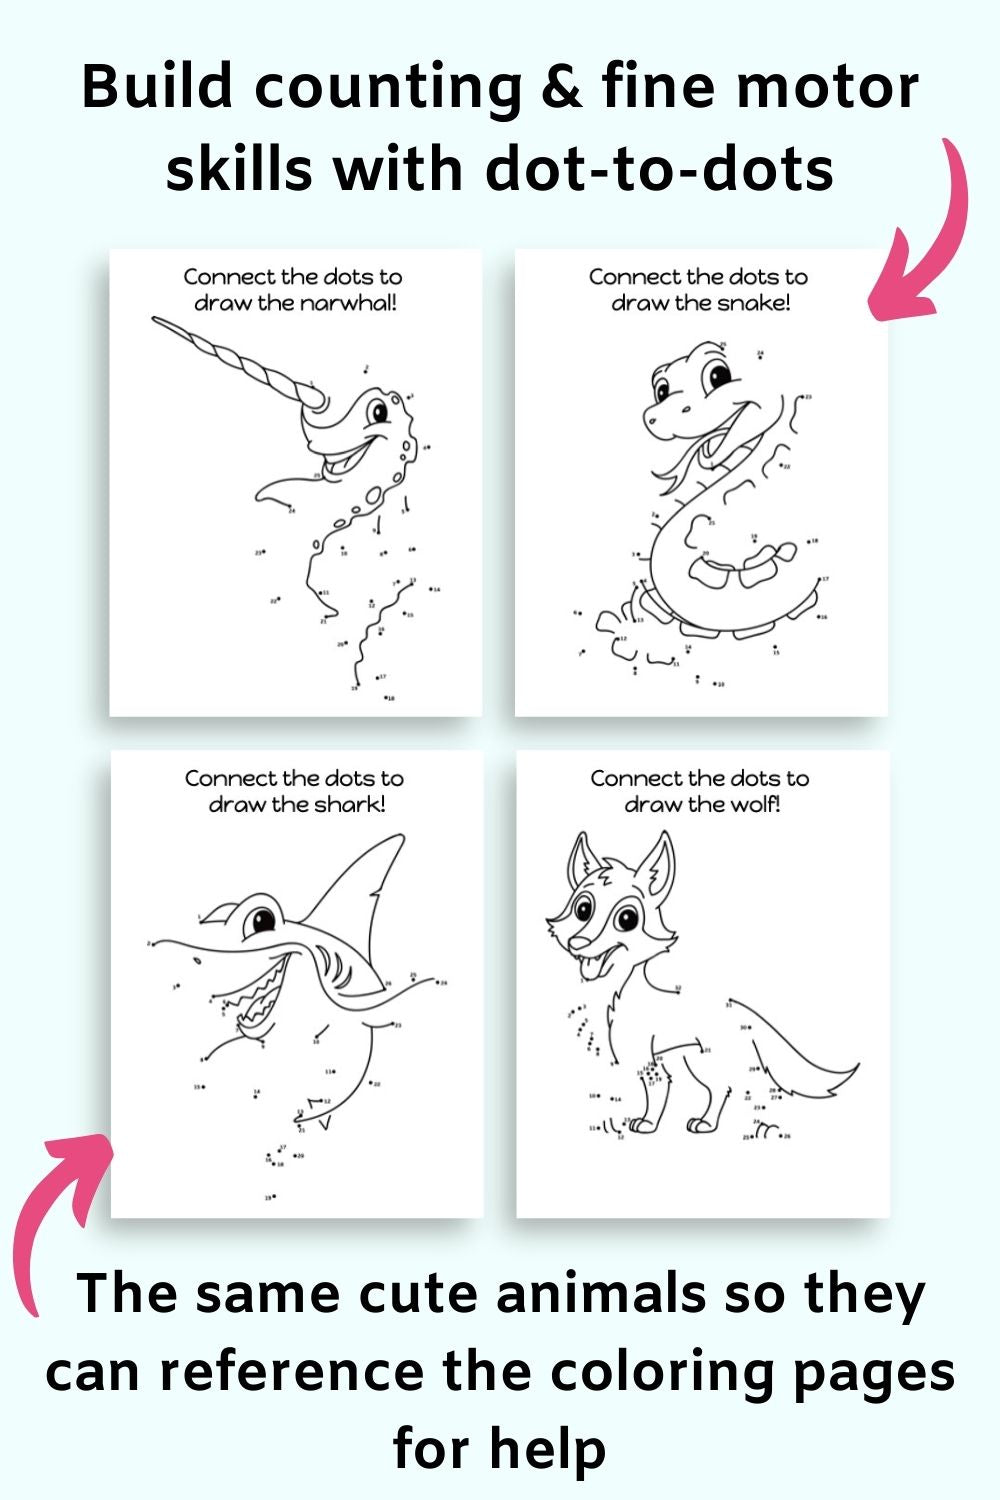 Text "build counting and fine motor skills with dot-to-dots" and "The same cute animals so they can reference the coloring pages for help" with dot to dot images of a narwhale, a snake, a shark, and a fox